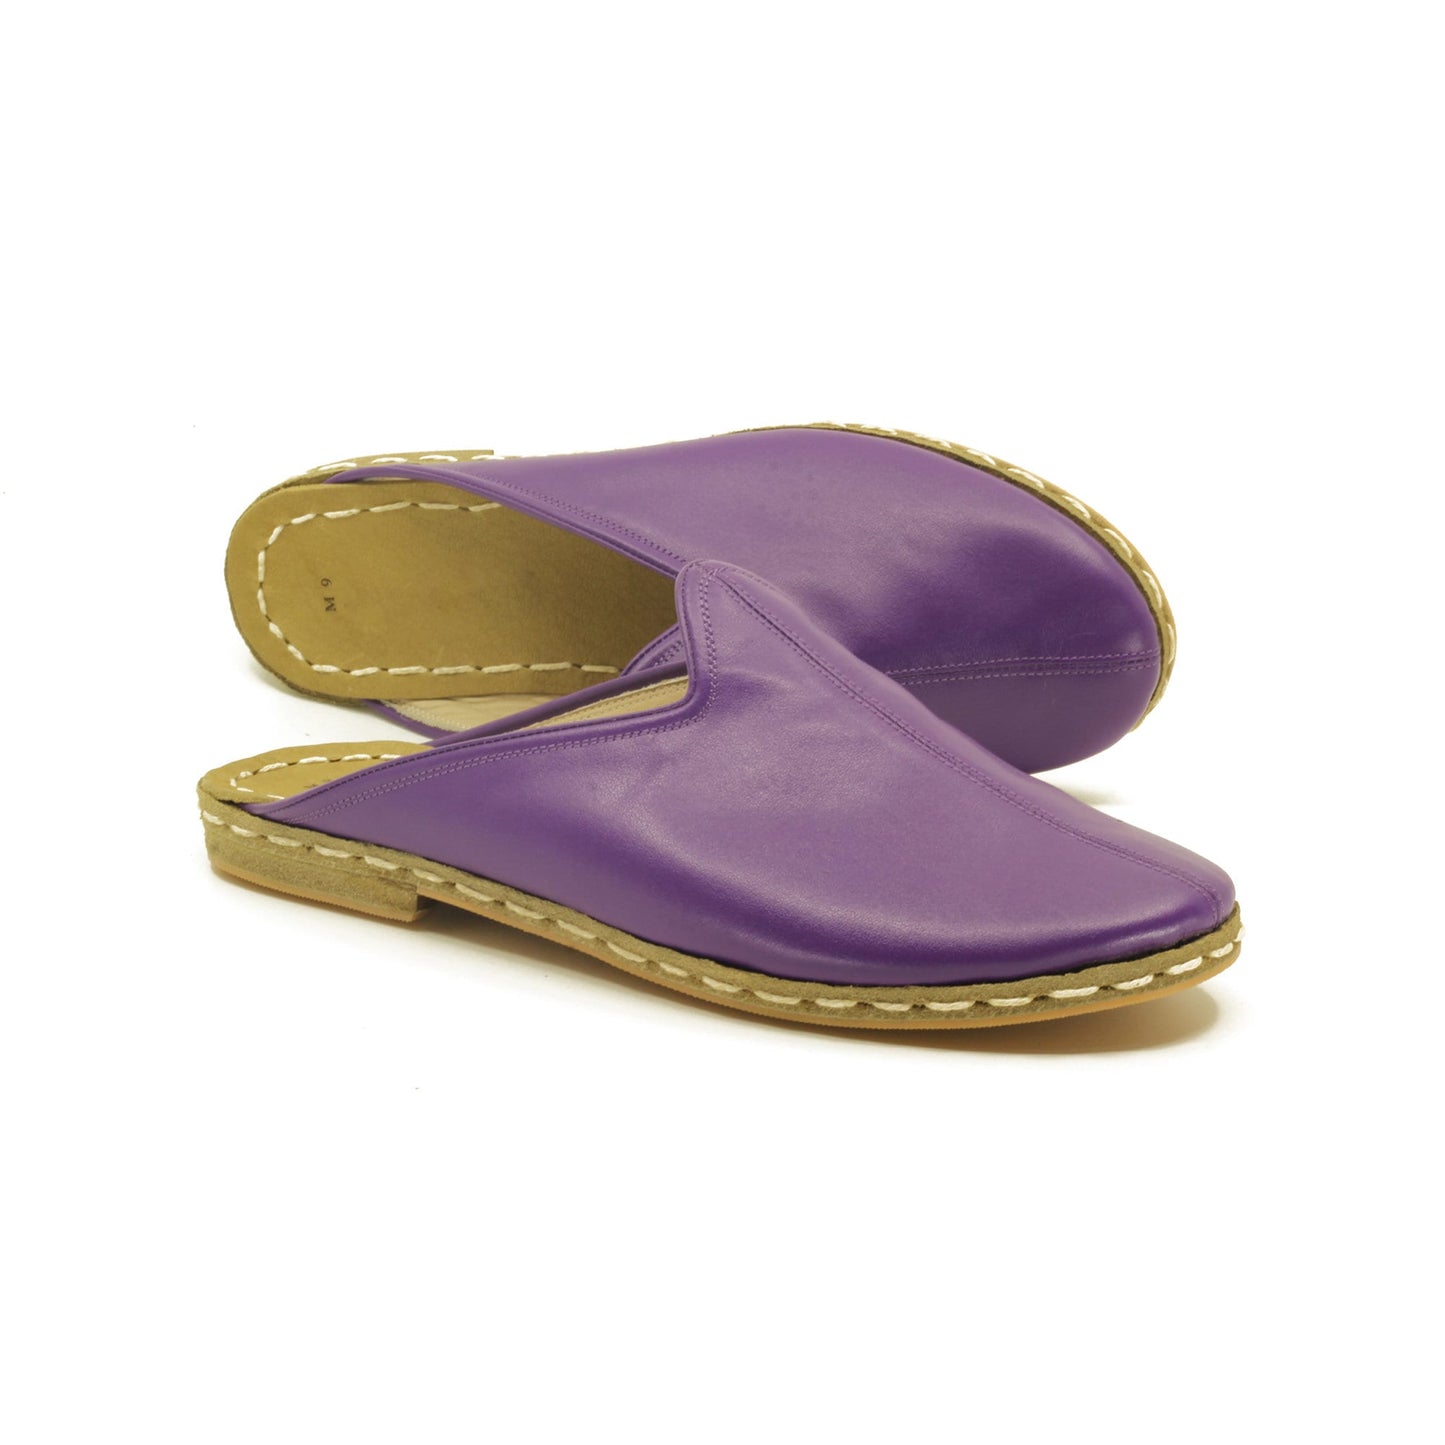 Close Toed Slippers - Purple Leather - Winter Slippers - Rubber Sole - For Women